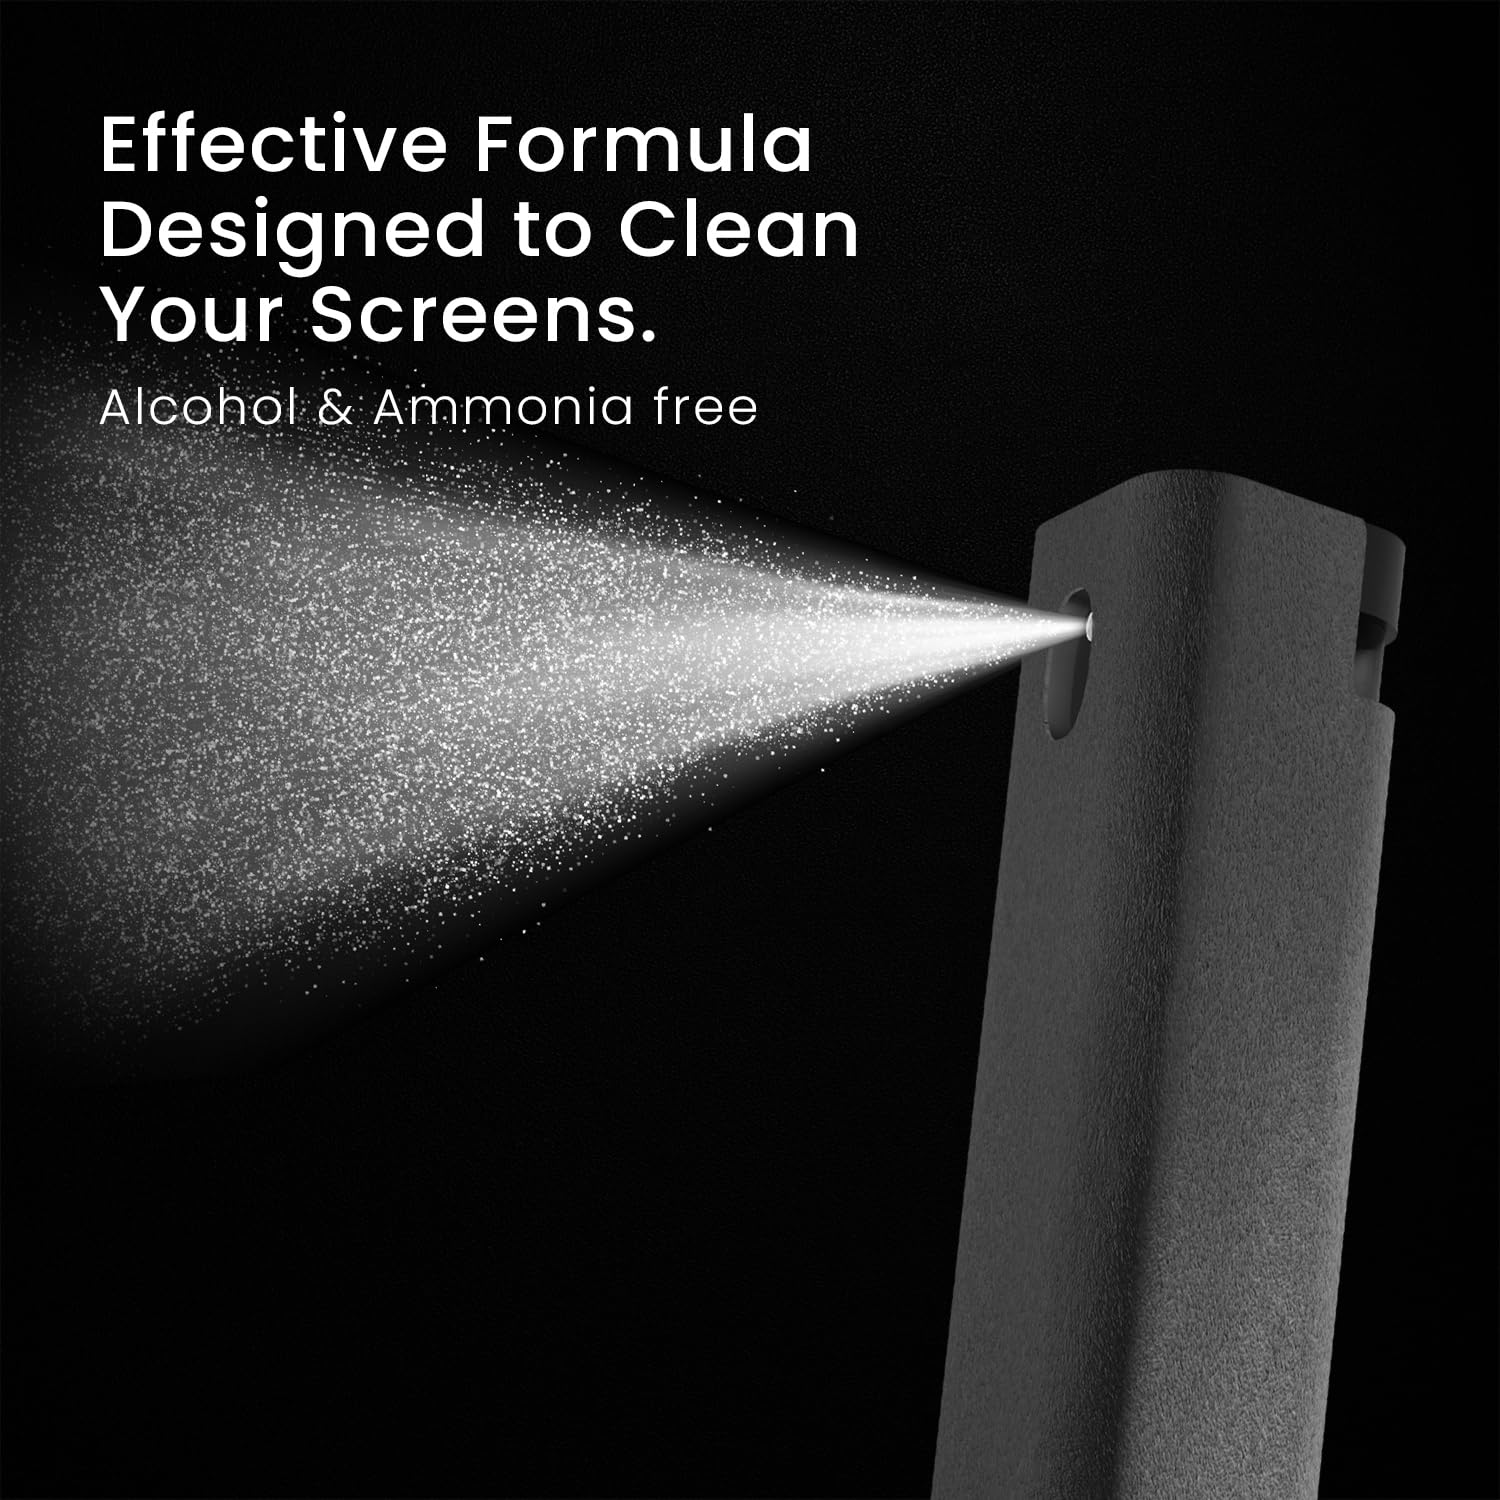 Screen Cleaner Spray and Wipe by EVEO- Computer Screen Cleaner, Laptop Screen Cleaner, MacBook & iPad Screen Cleaner, iPhone Cleaner, Car Screen Cleaner, 2in1 Touchscreen Mist Cleaner- (0.3 oz) Grey